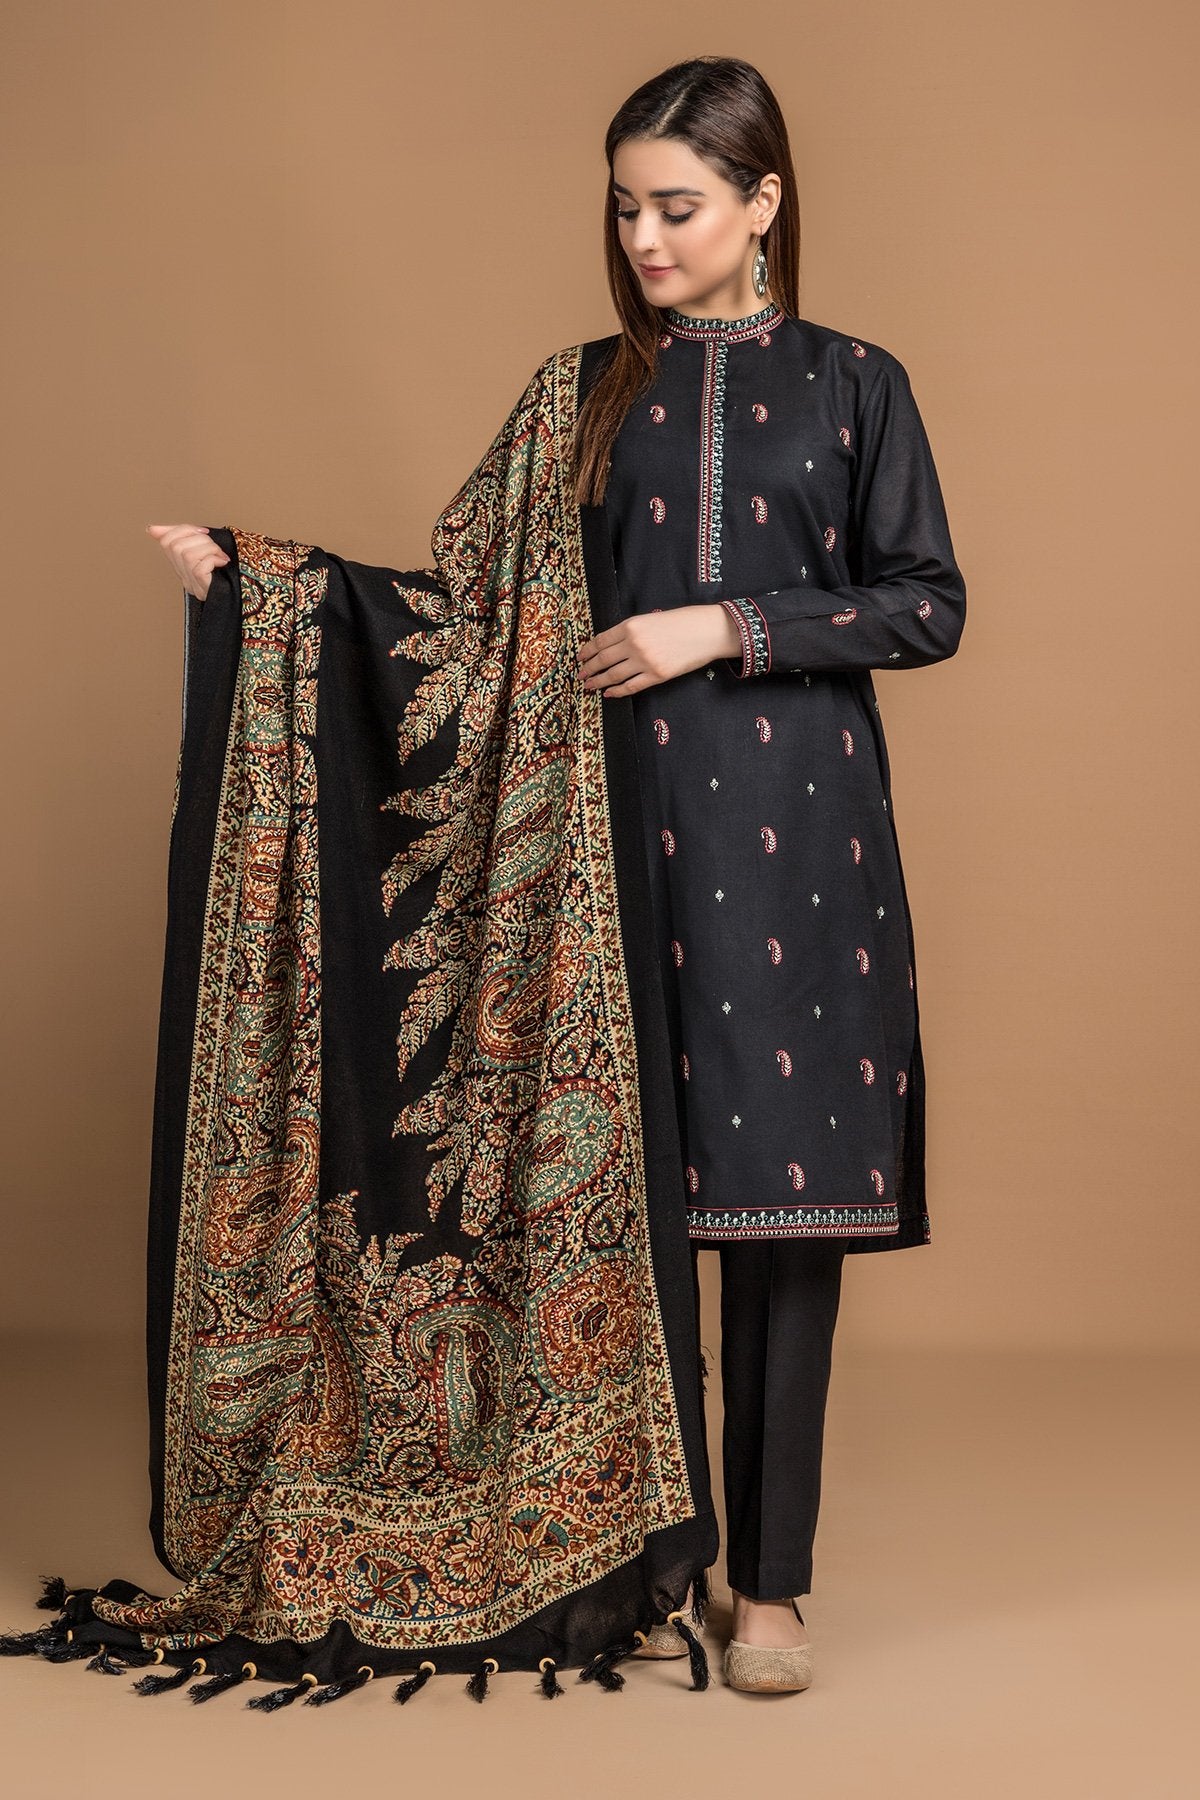 Dyed, Printed & Embroidered 3Pcs Suit with Wool Shawl